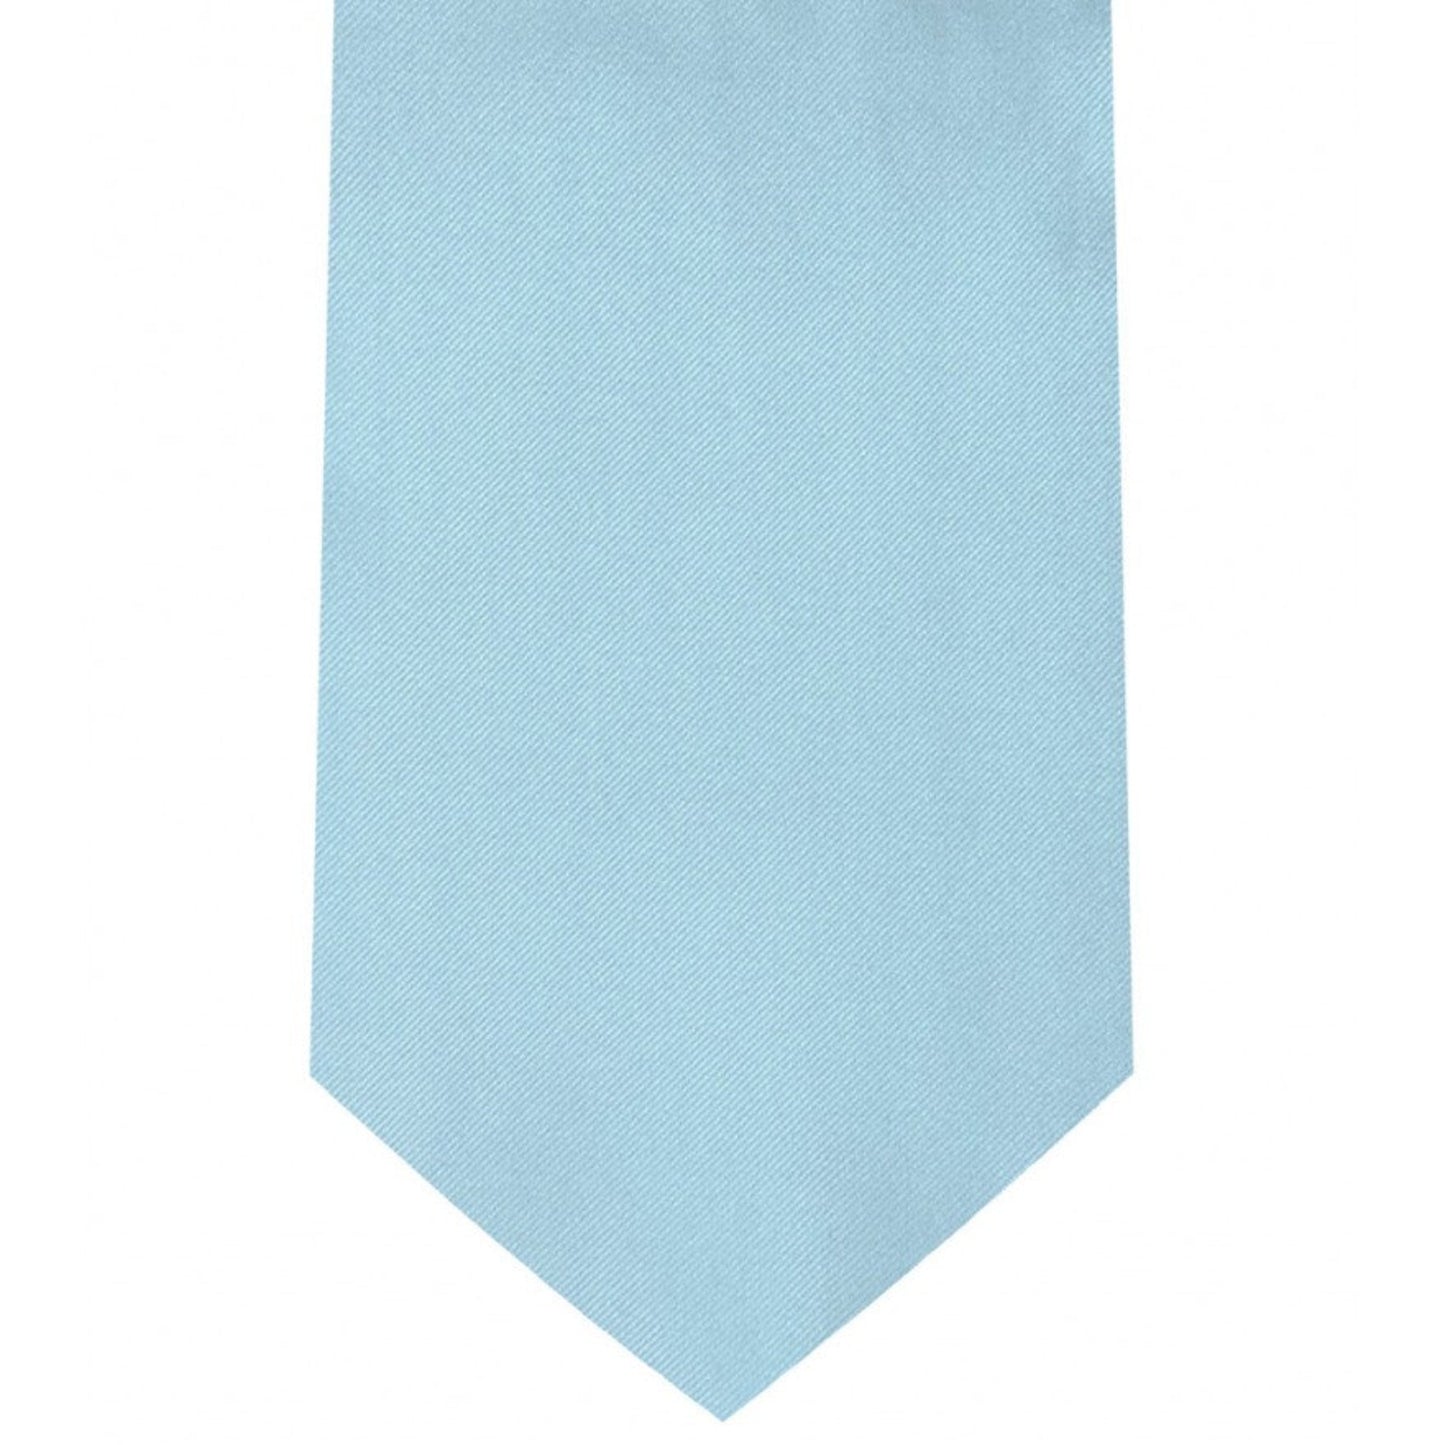 Classic Powder Blue Tie Regular width 3.5 inches With Matching Pocket Square | KCT Menswear 